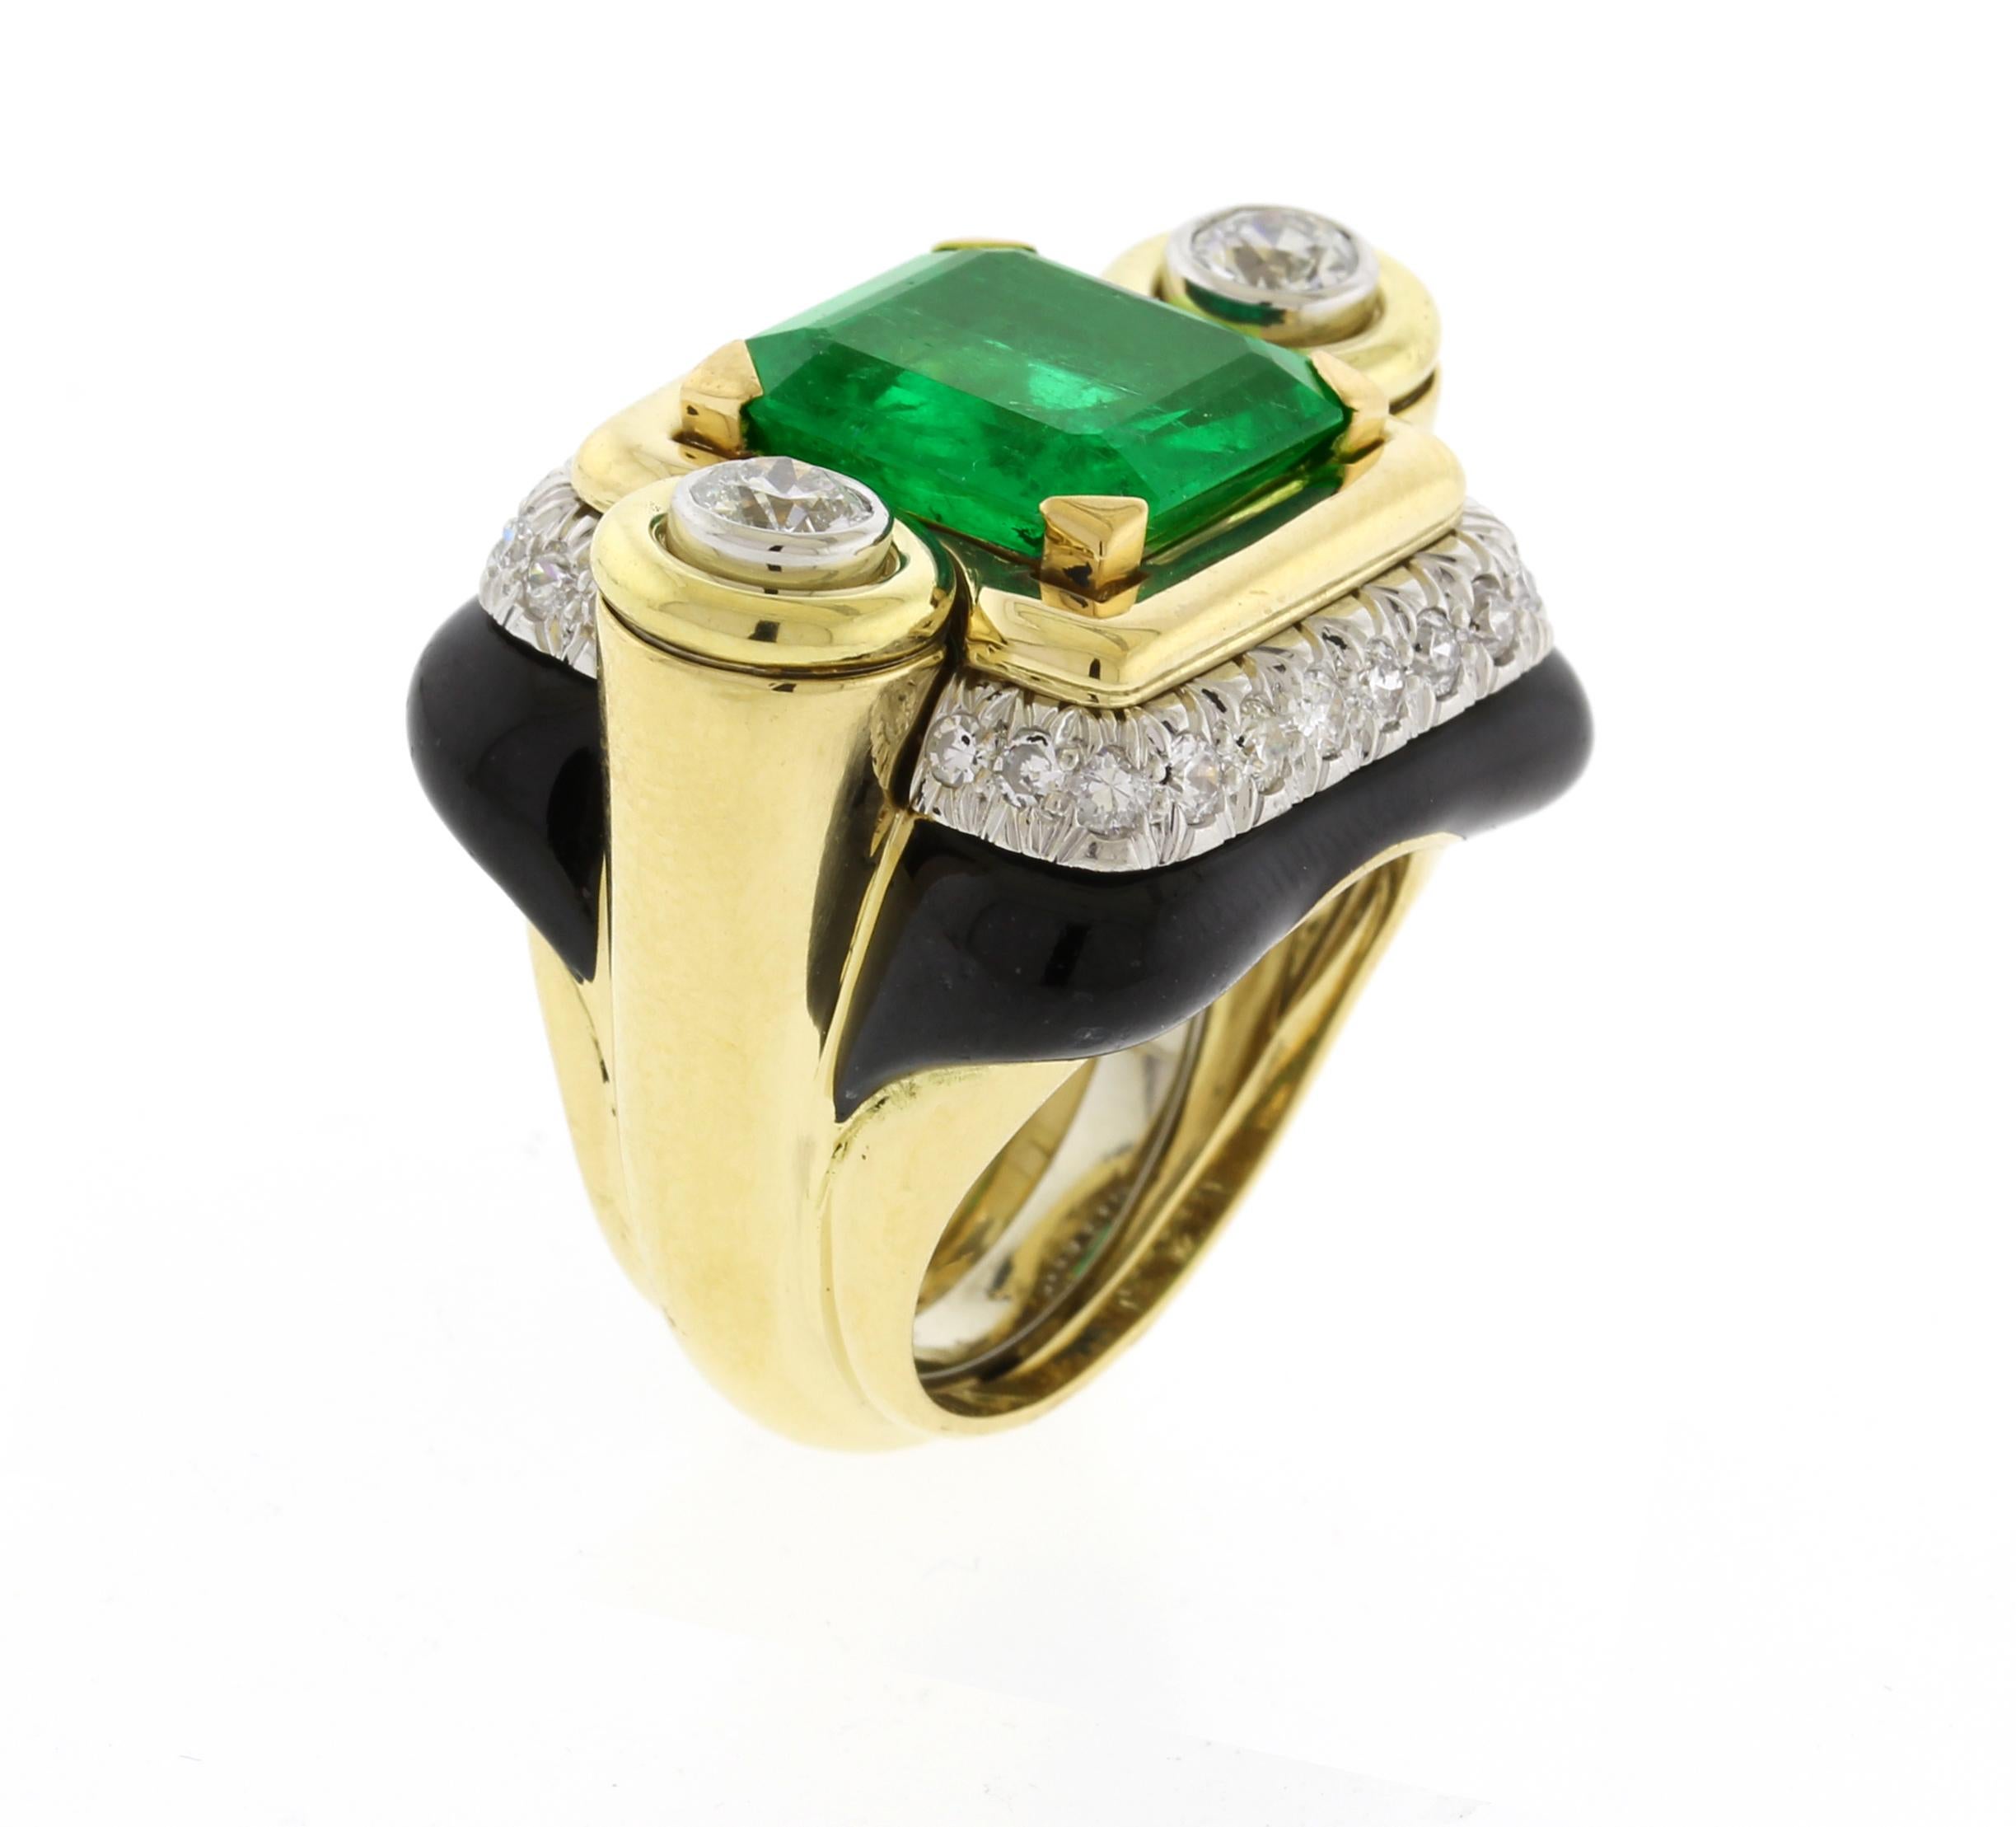 From David Webb, a beautiful emerald ring with diamonds and black enamel.  The ring does have a U guard in it.
• Designer: David Webb
• Metal: 18 karat gold
• Circa: 1980s
• Size: 5, cannot be resized 
• Gemstones: Emerald and Diamonds
• Weight: